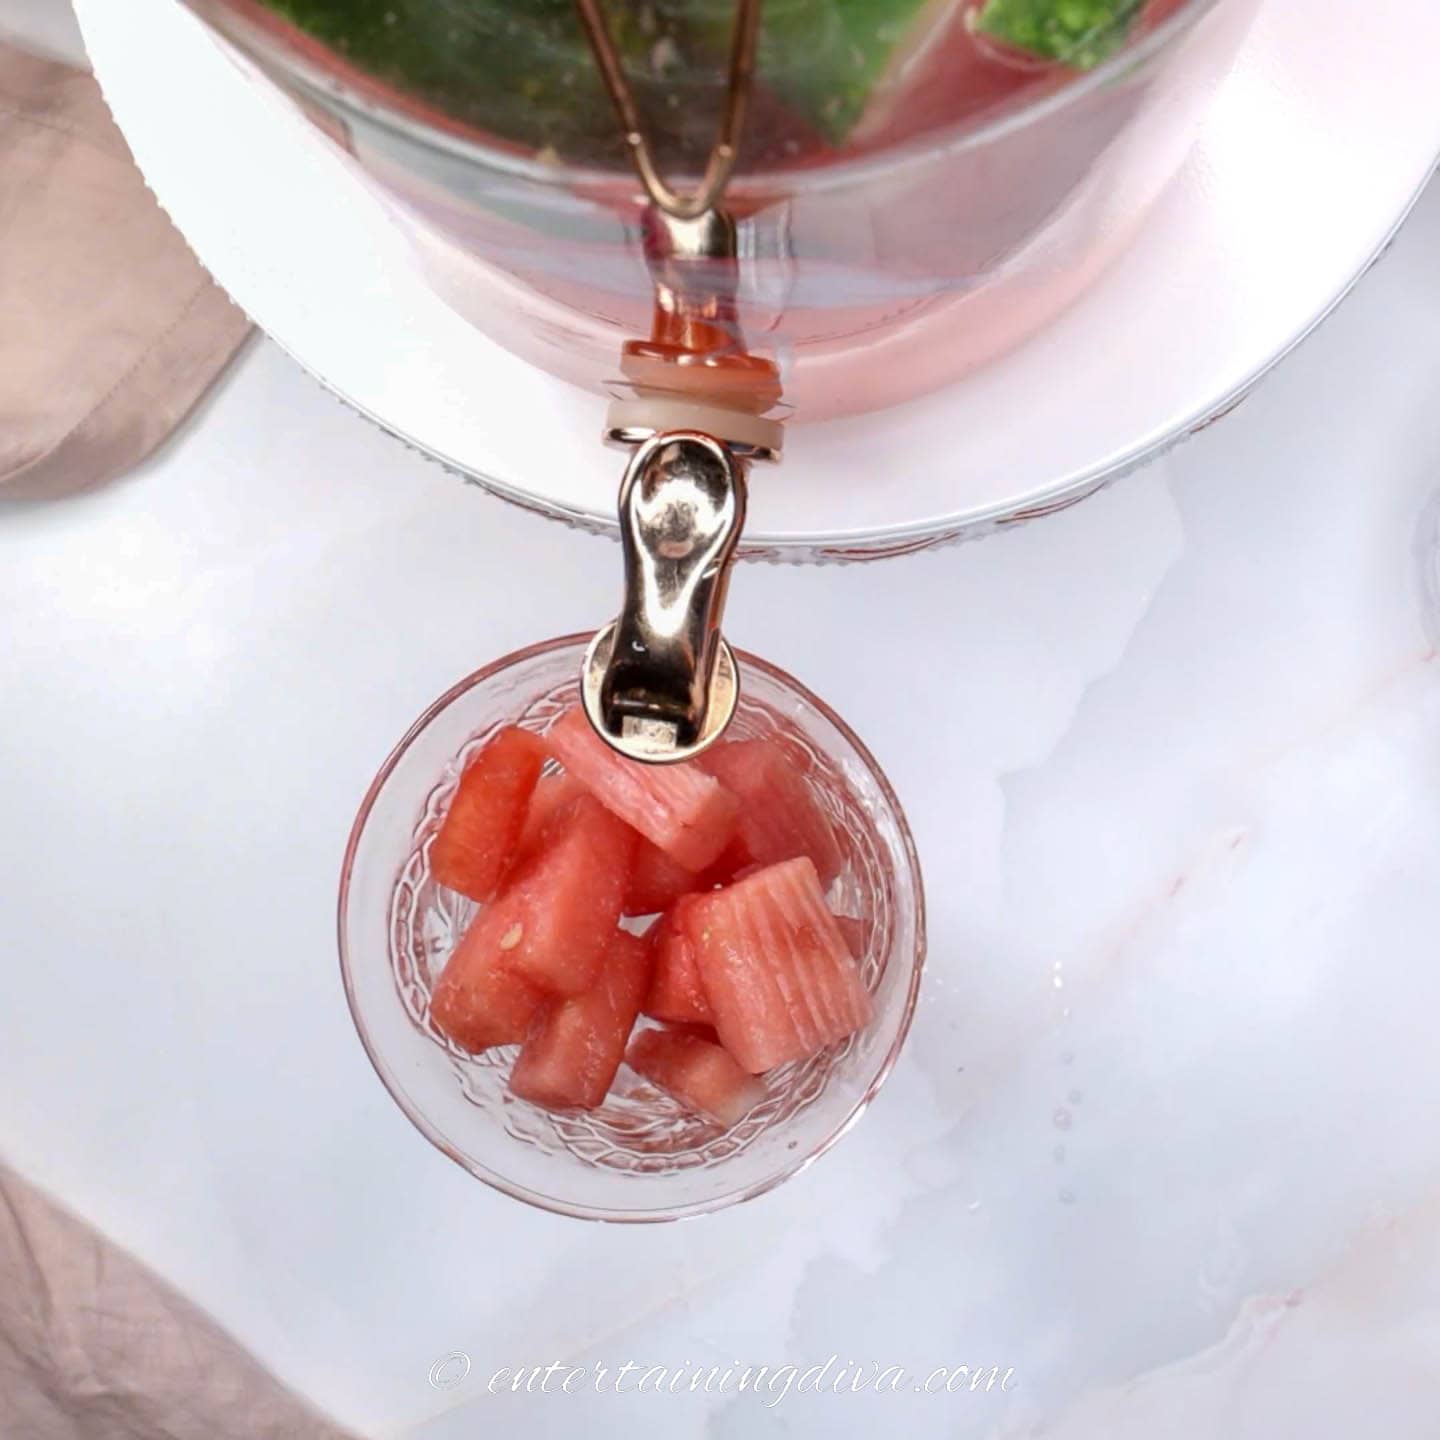 glass with watermelon cubes in it